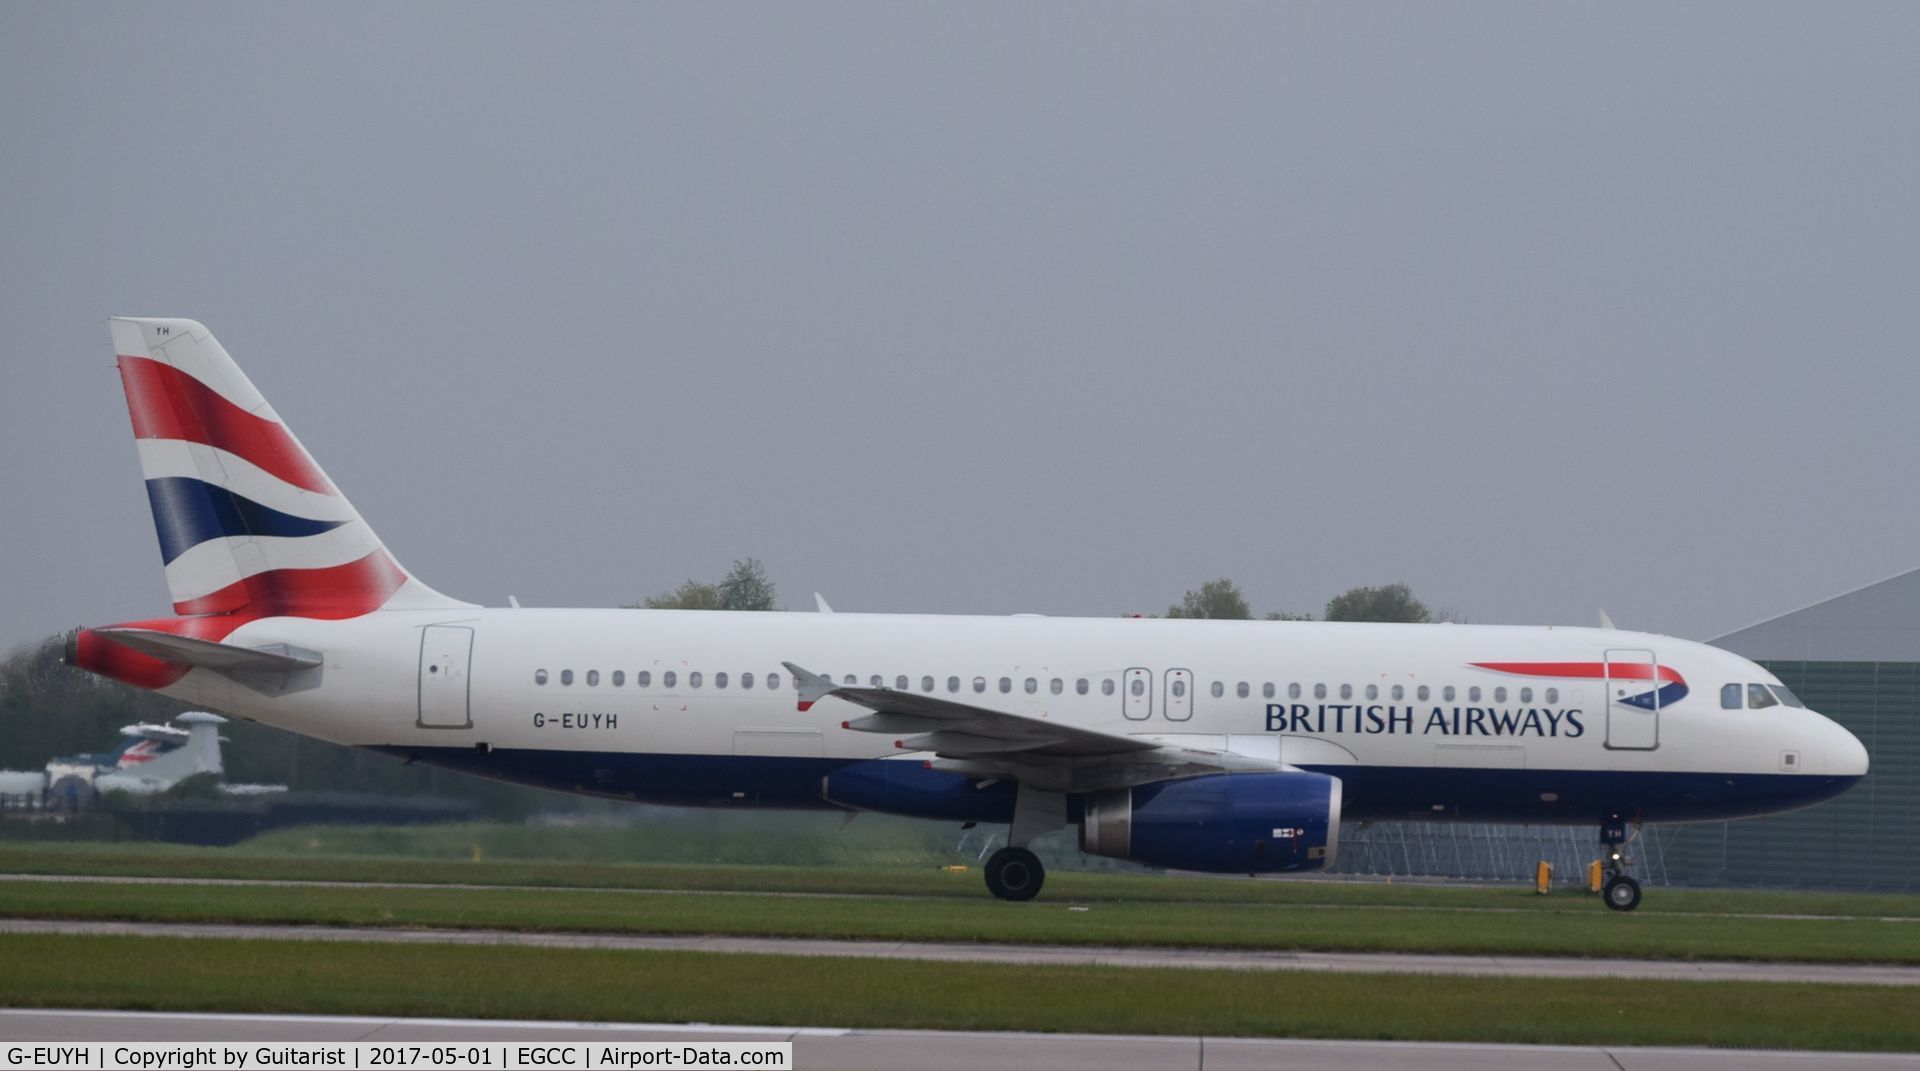 G-EUYH, 2010 Airbus A320-232 C/N 4265, At Manchester